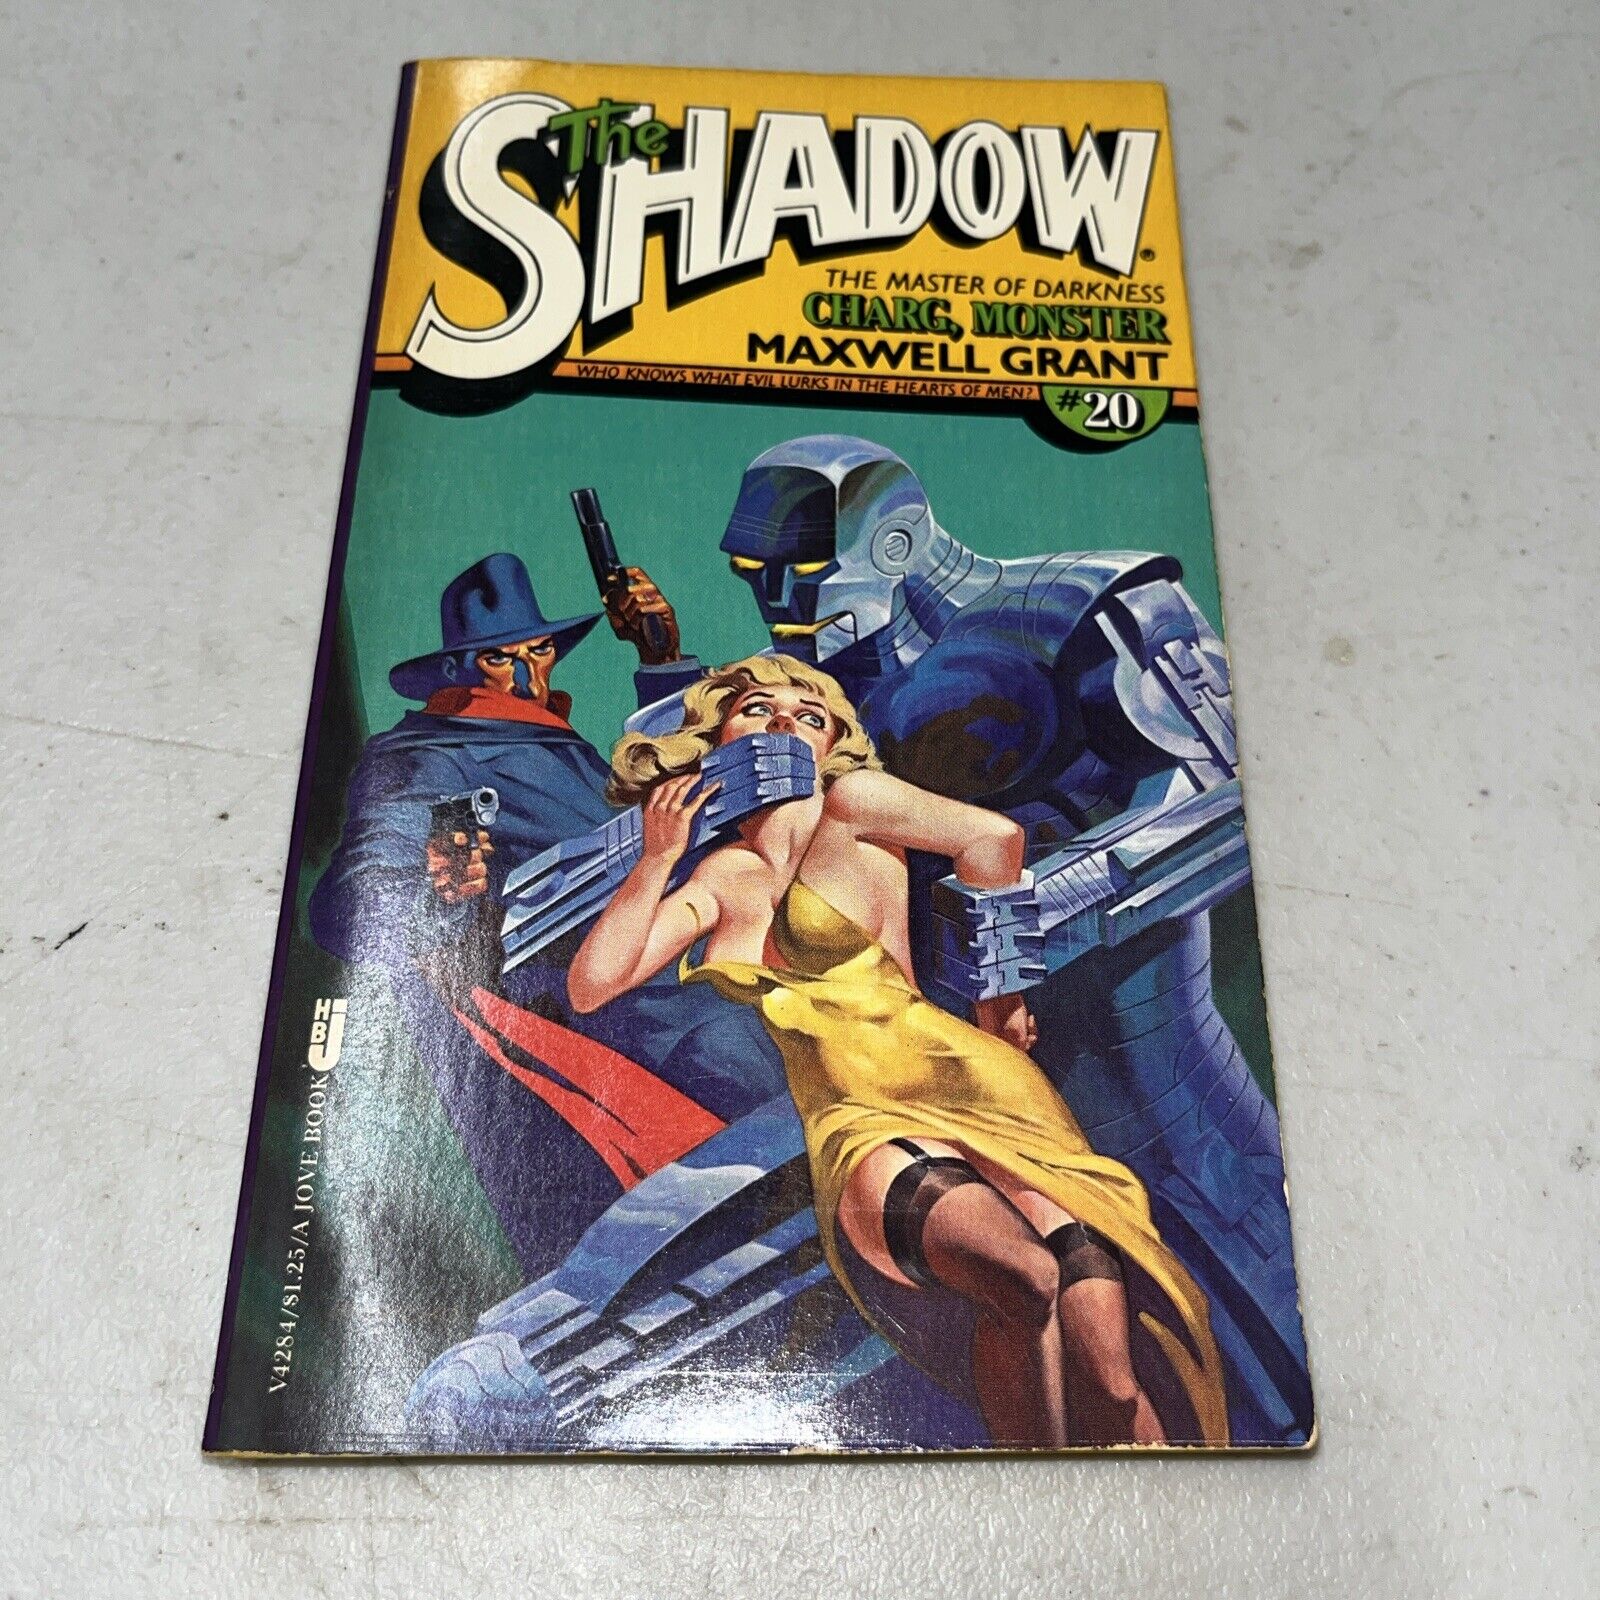 The Shadow # 20 